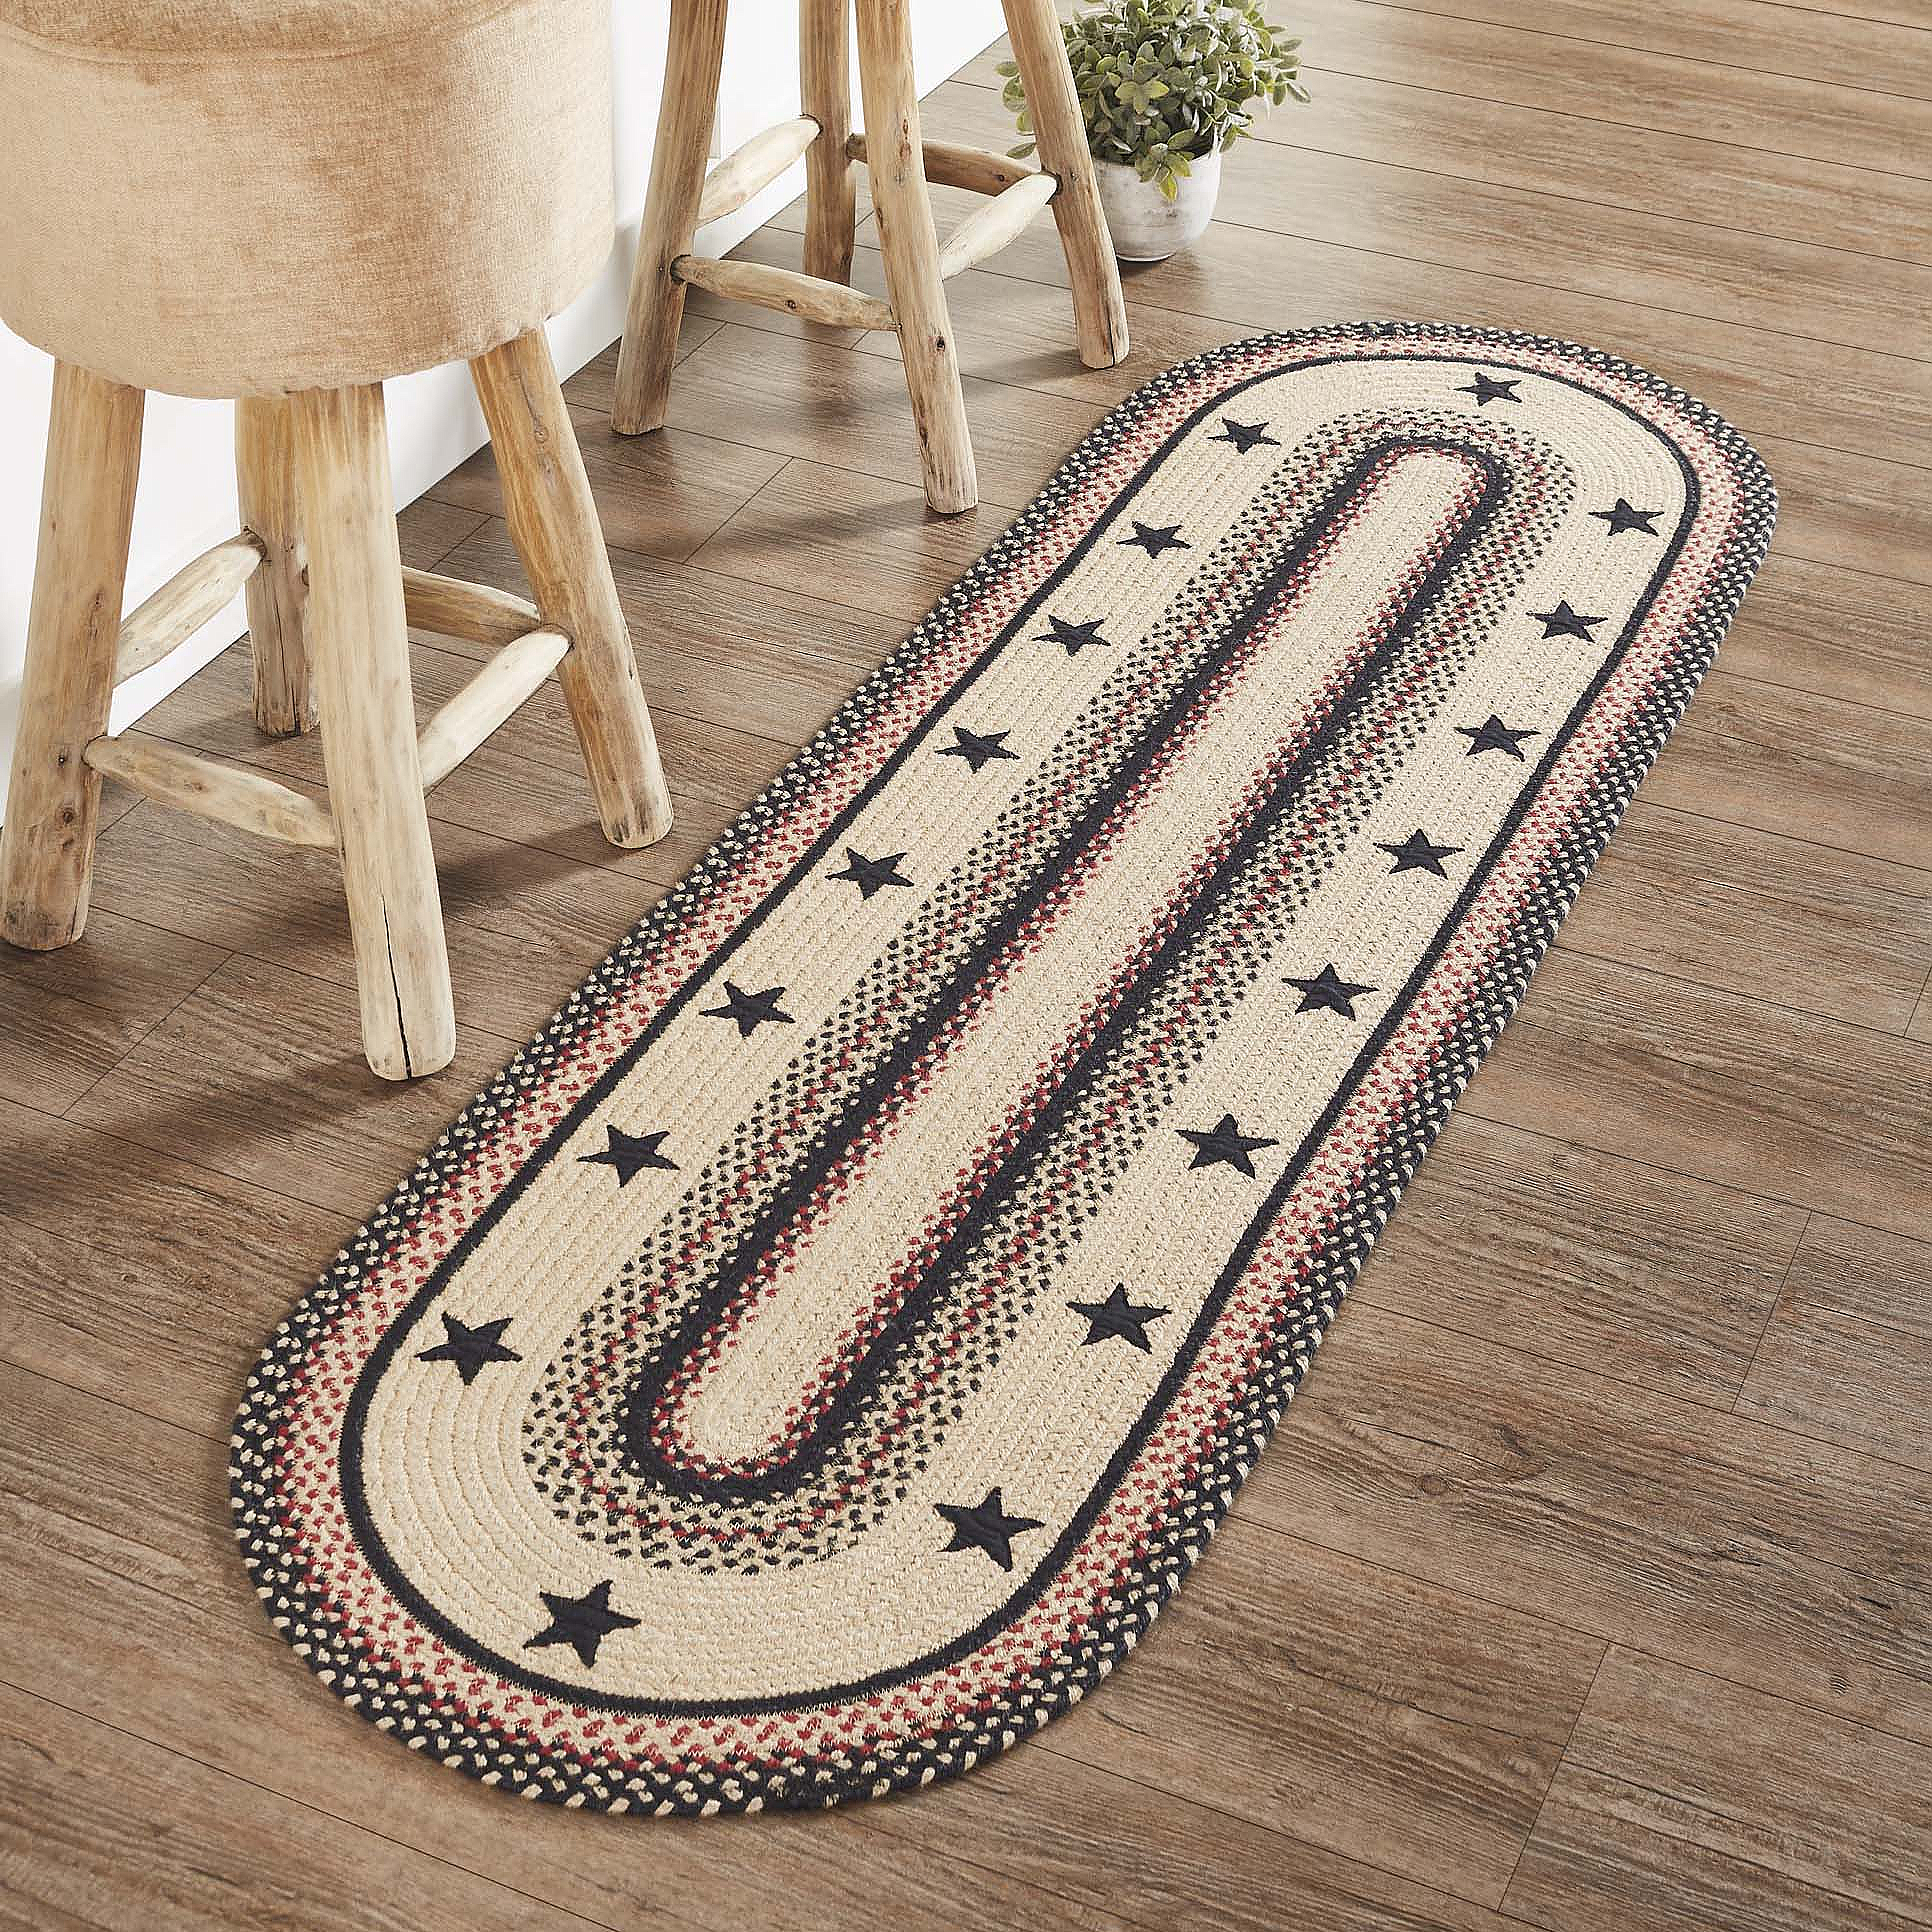 https://www.langegeneralstore.com/cdn/shop/files/Colonial-Star-Collection-Braided-Rugs-Oval-Oval-Runner-22-x-72-3.png?v=1684673170